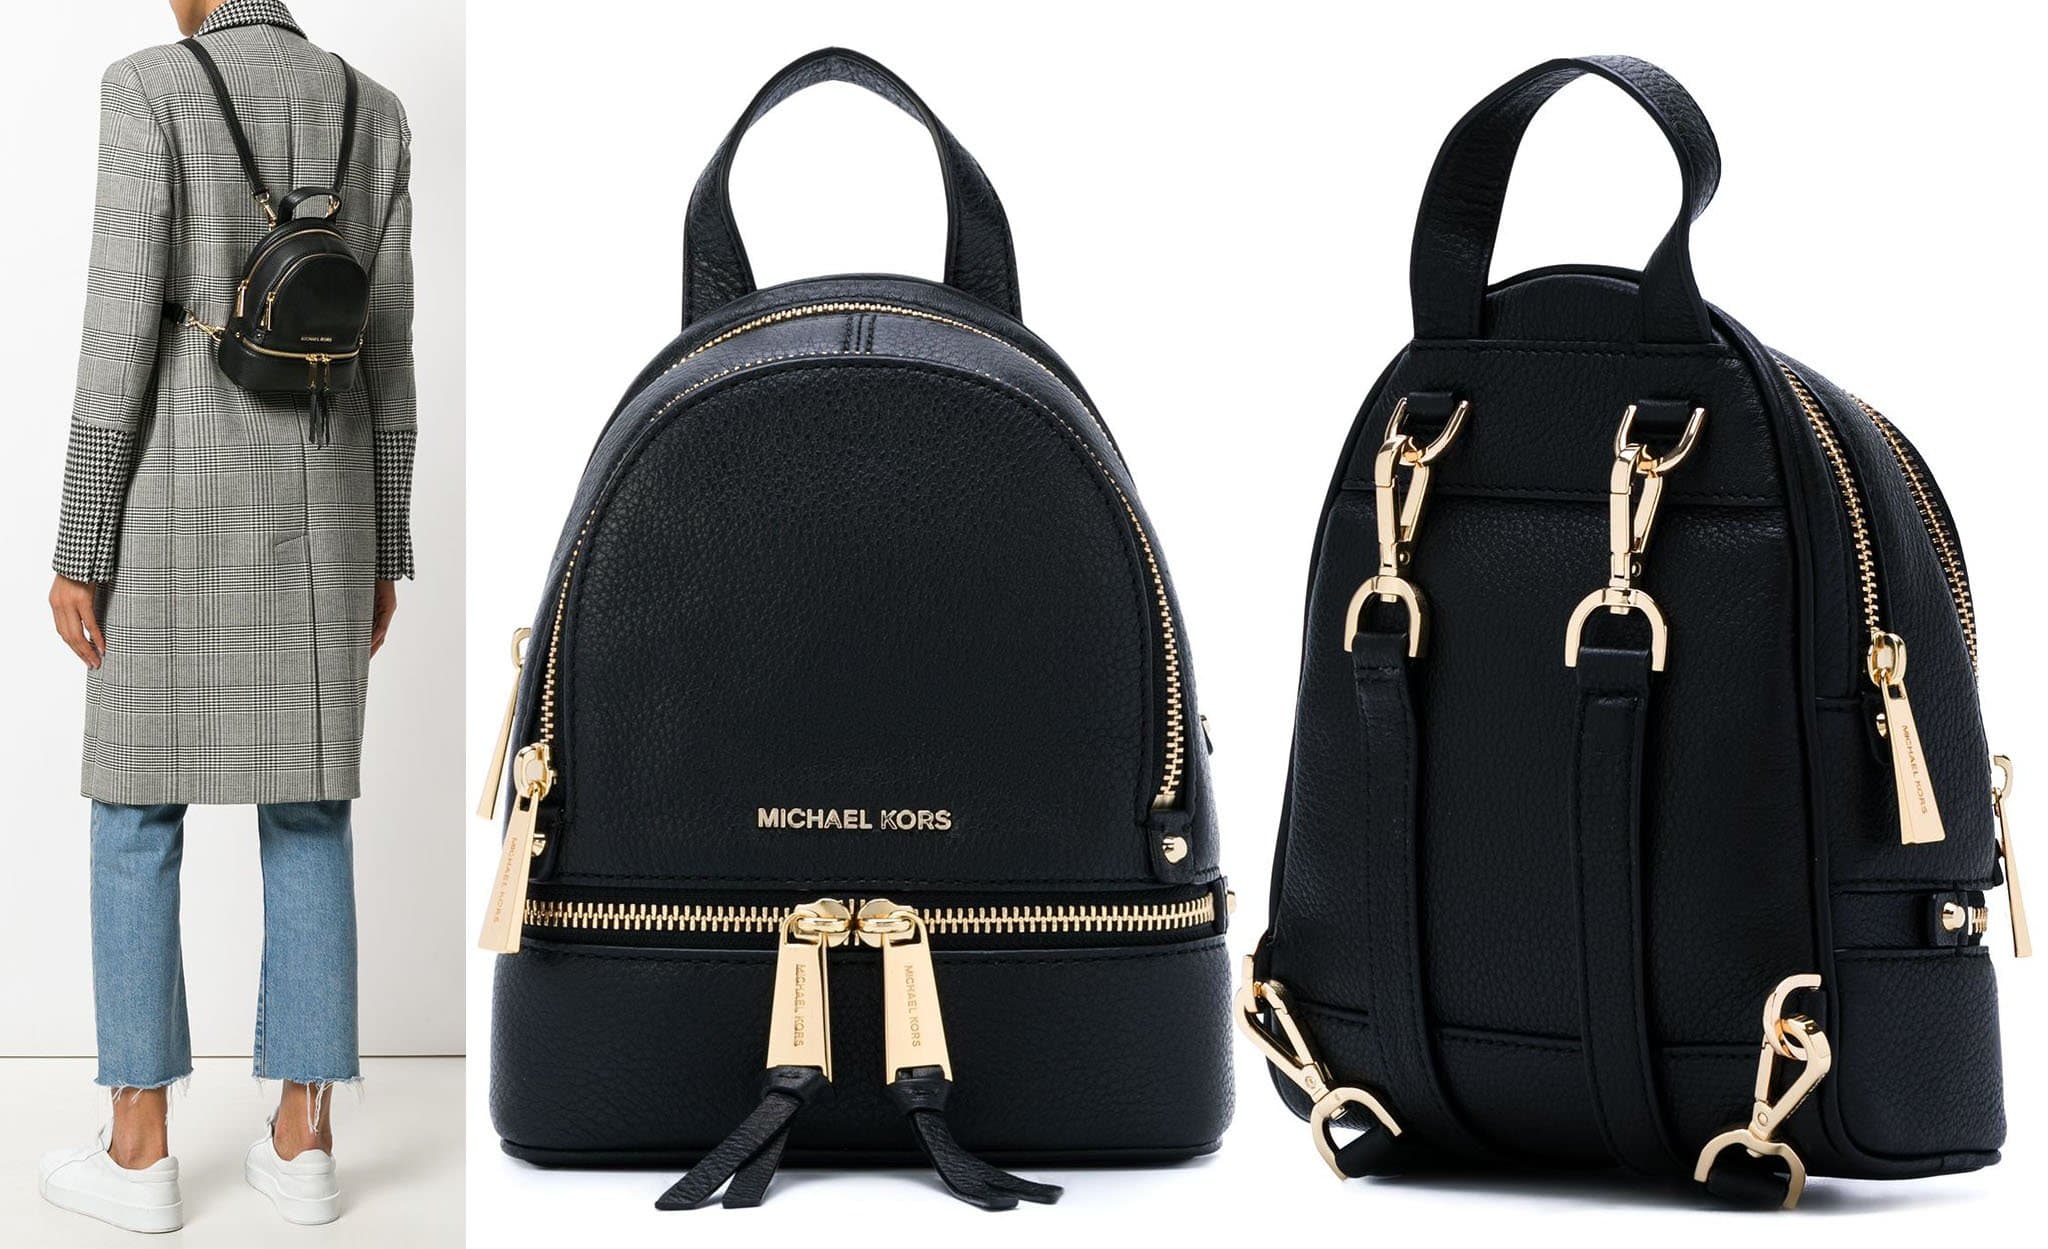 Michael Kors' Rhea is a versatile, multi-functional mini backpack with a streamlined silhouette that you can carry by the top handle or the adjustable shoulder straps